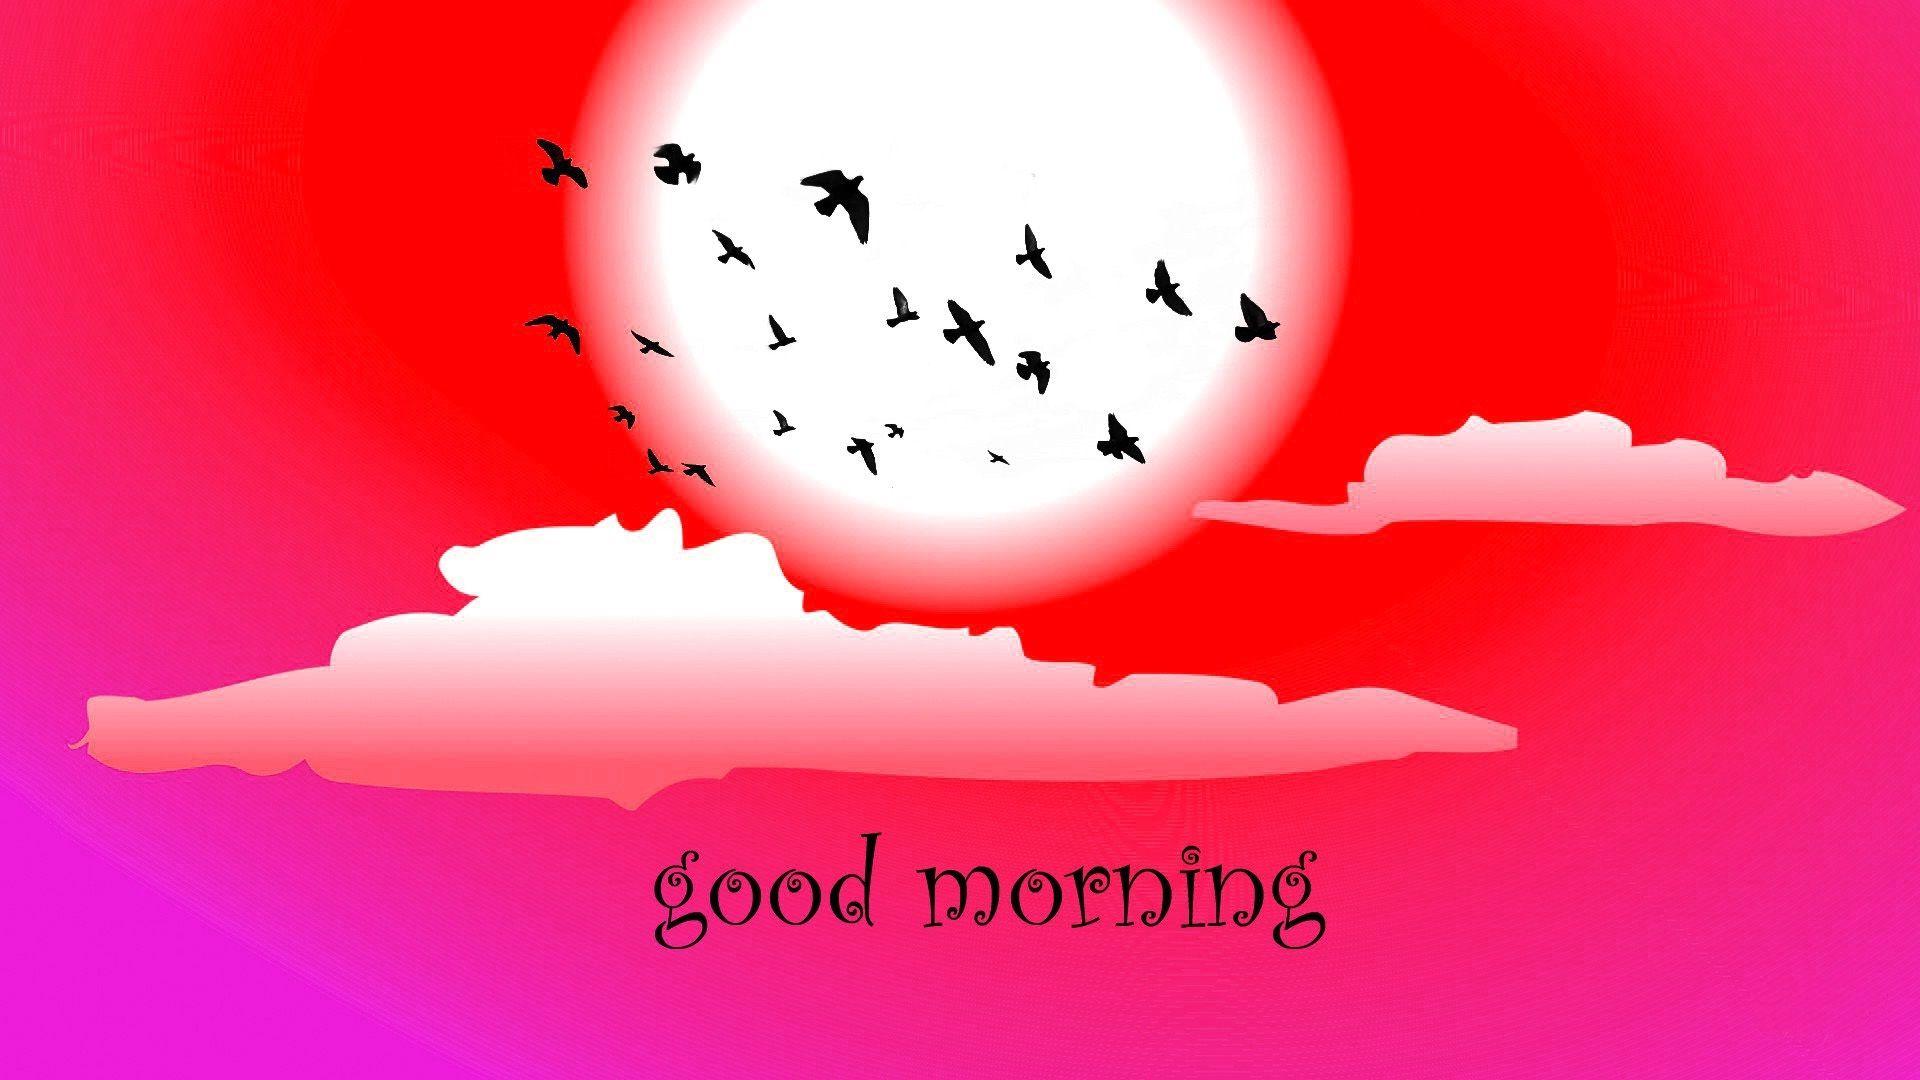 Good morning have a nice day HD wallpaperNew HD wallpaper